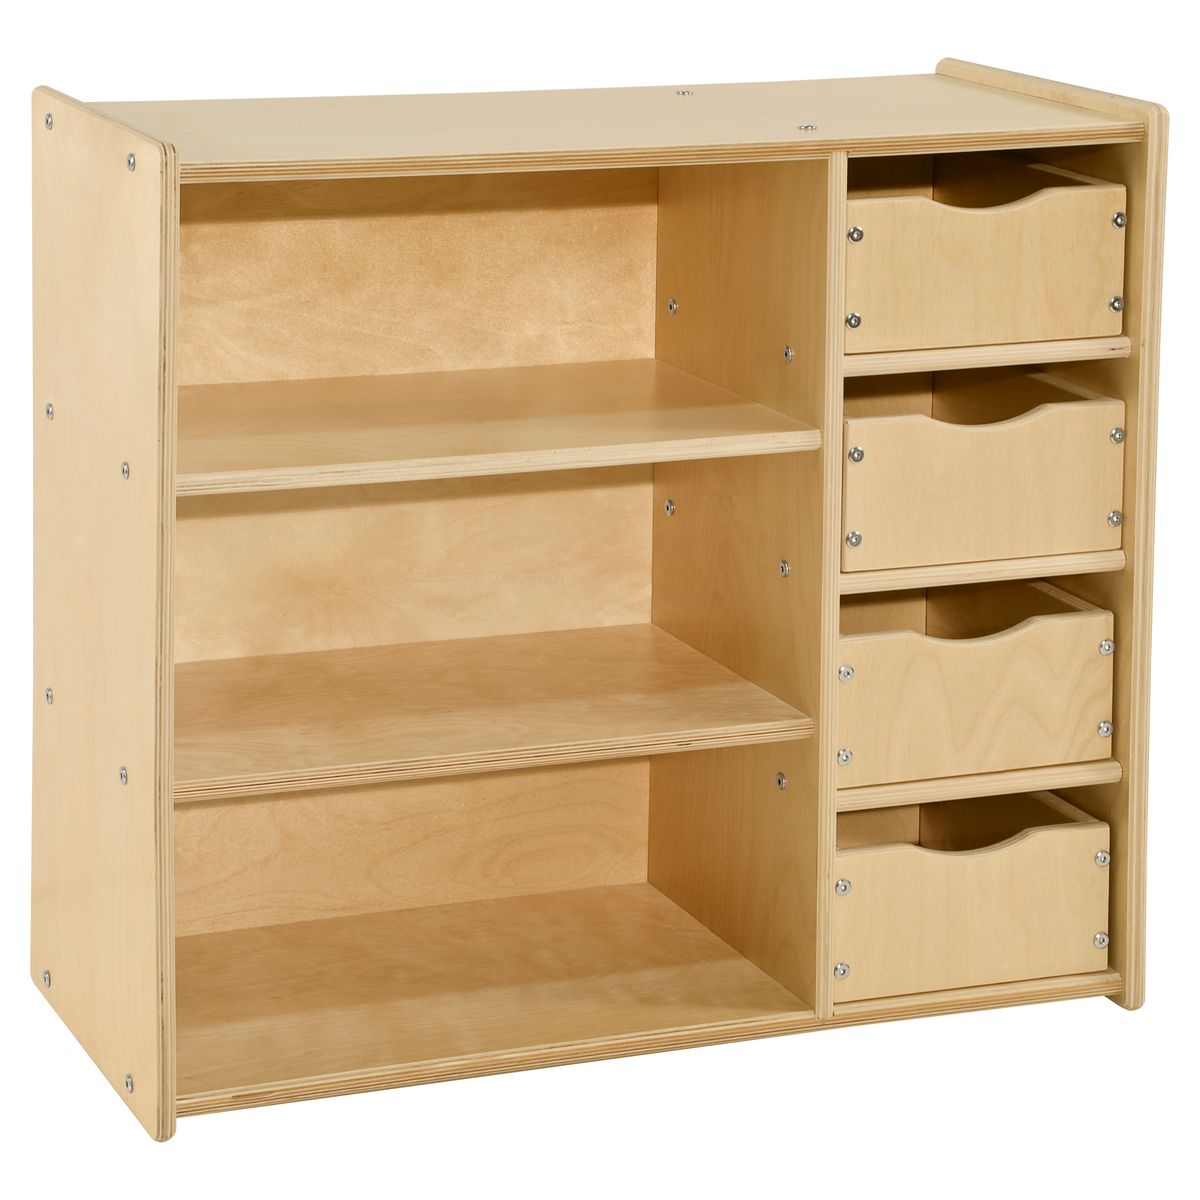 C14475f Storage Center With Drawers - Assembled